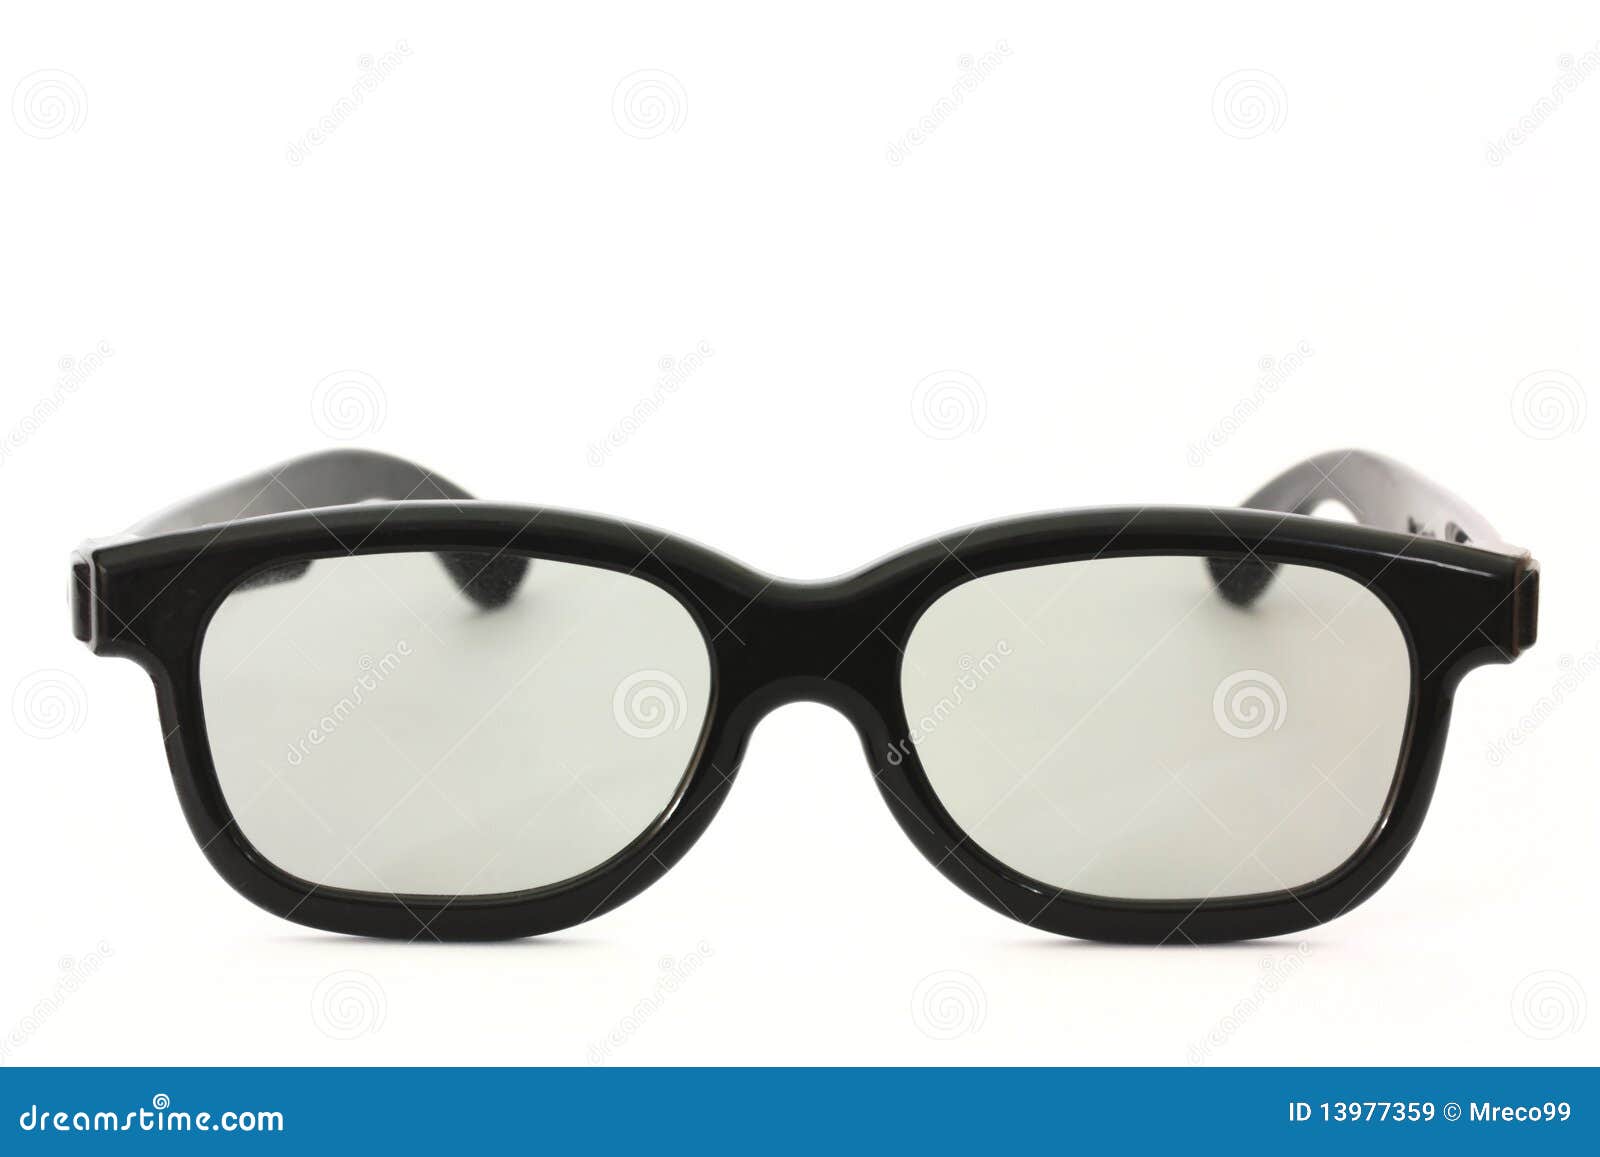 Black Rimmed Glasses Isolated Stock Image - Image of optical, clear ...